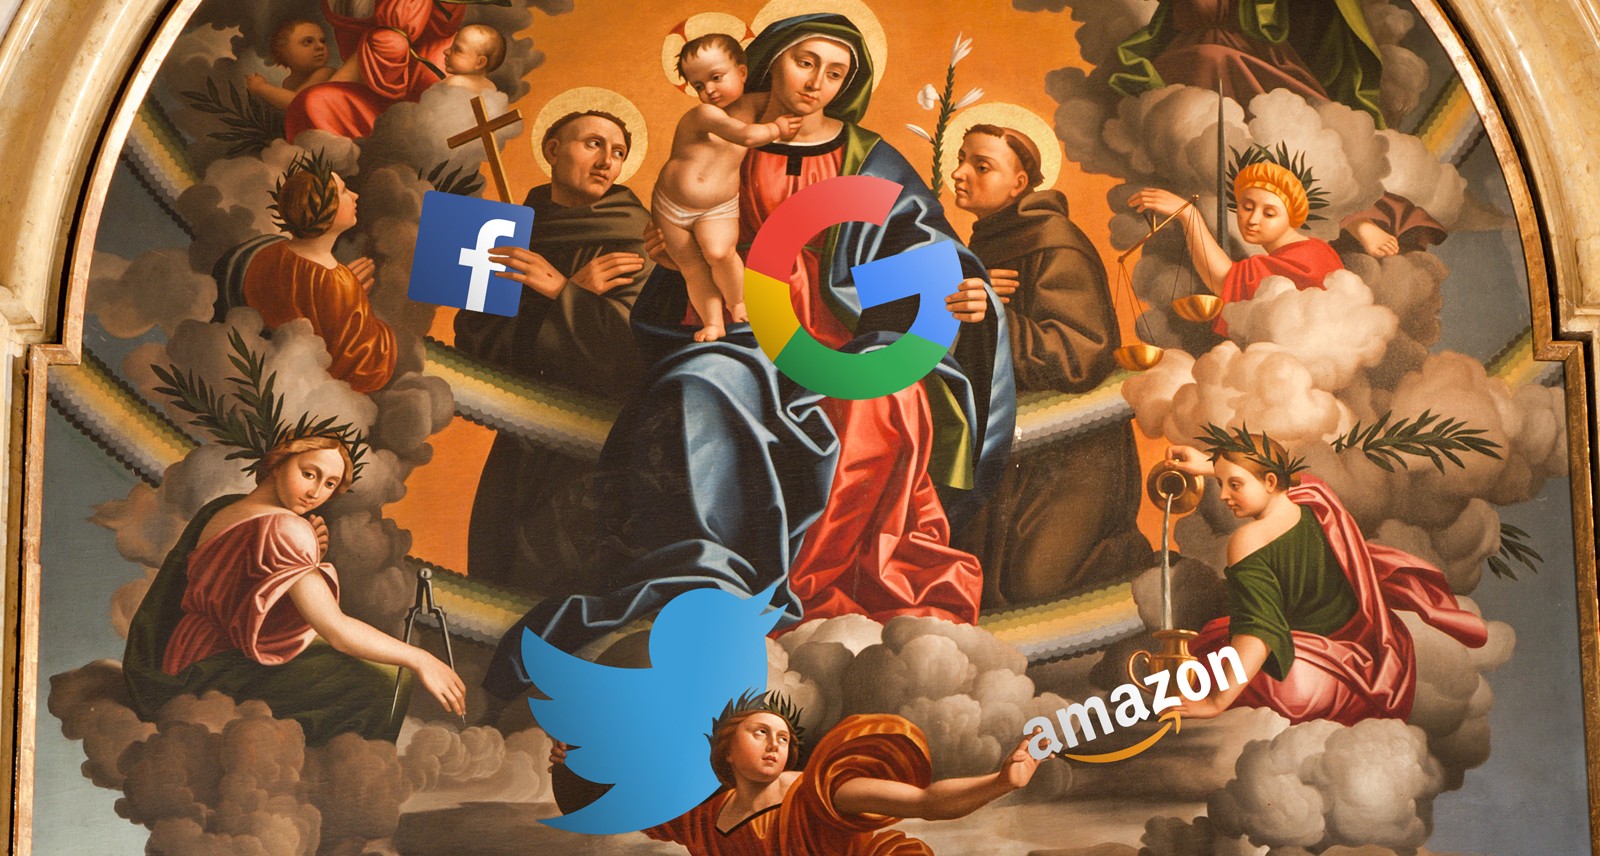 Silicon Valley's Tech Giants Have Become Our New Gods. Here's Why It's Time to Defy Them